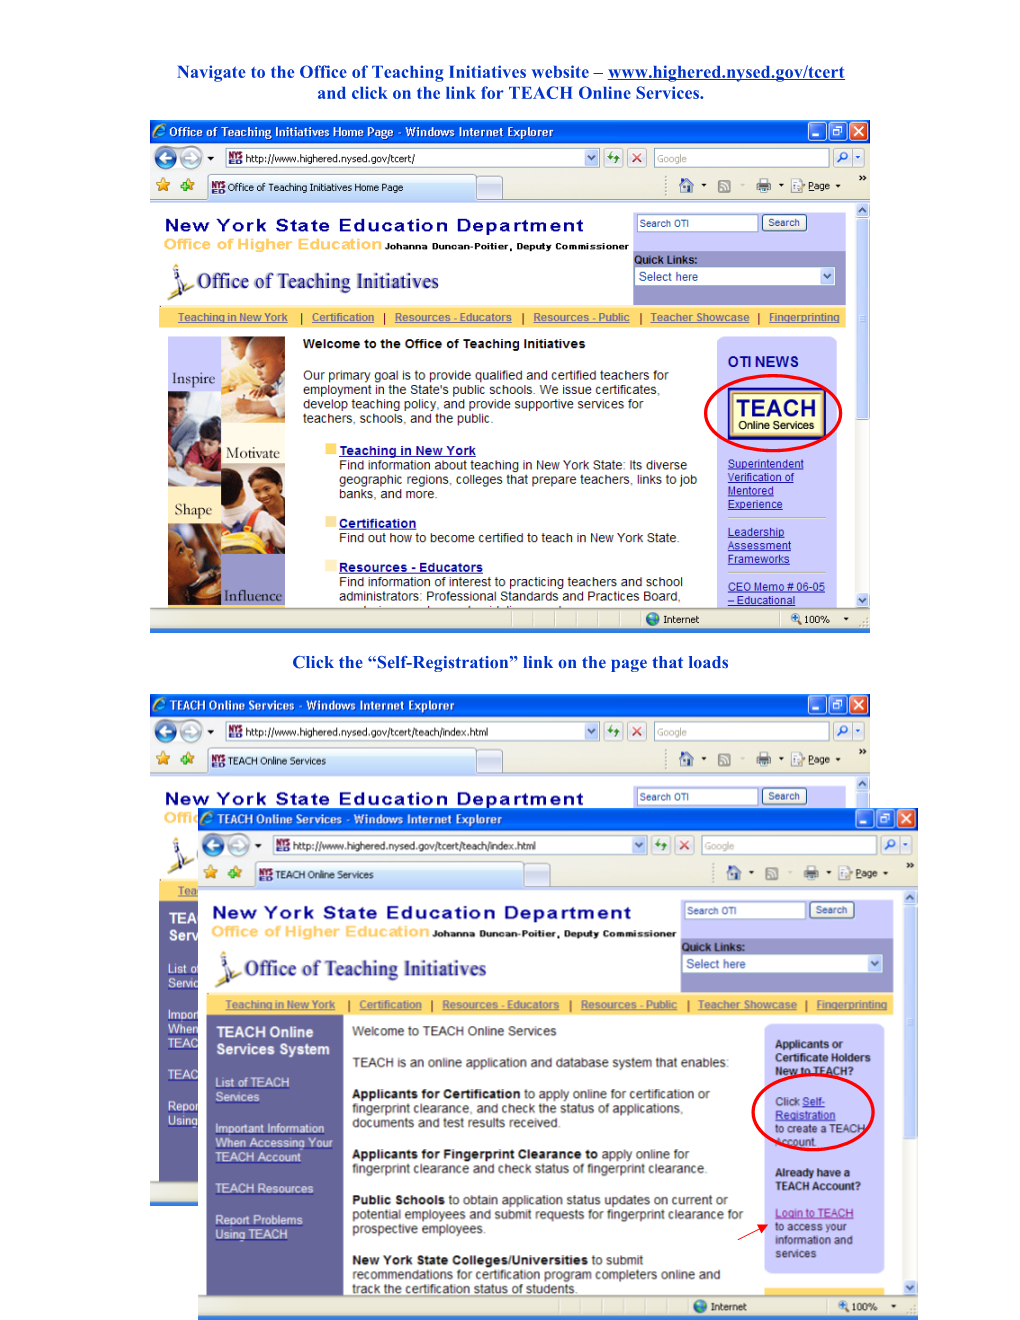 Navigate to the Office of Teaching Initiatives Website